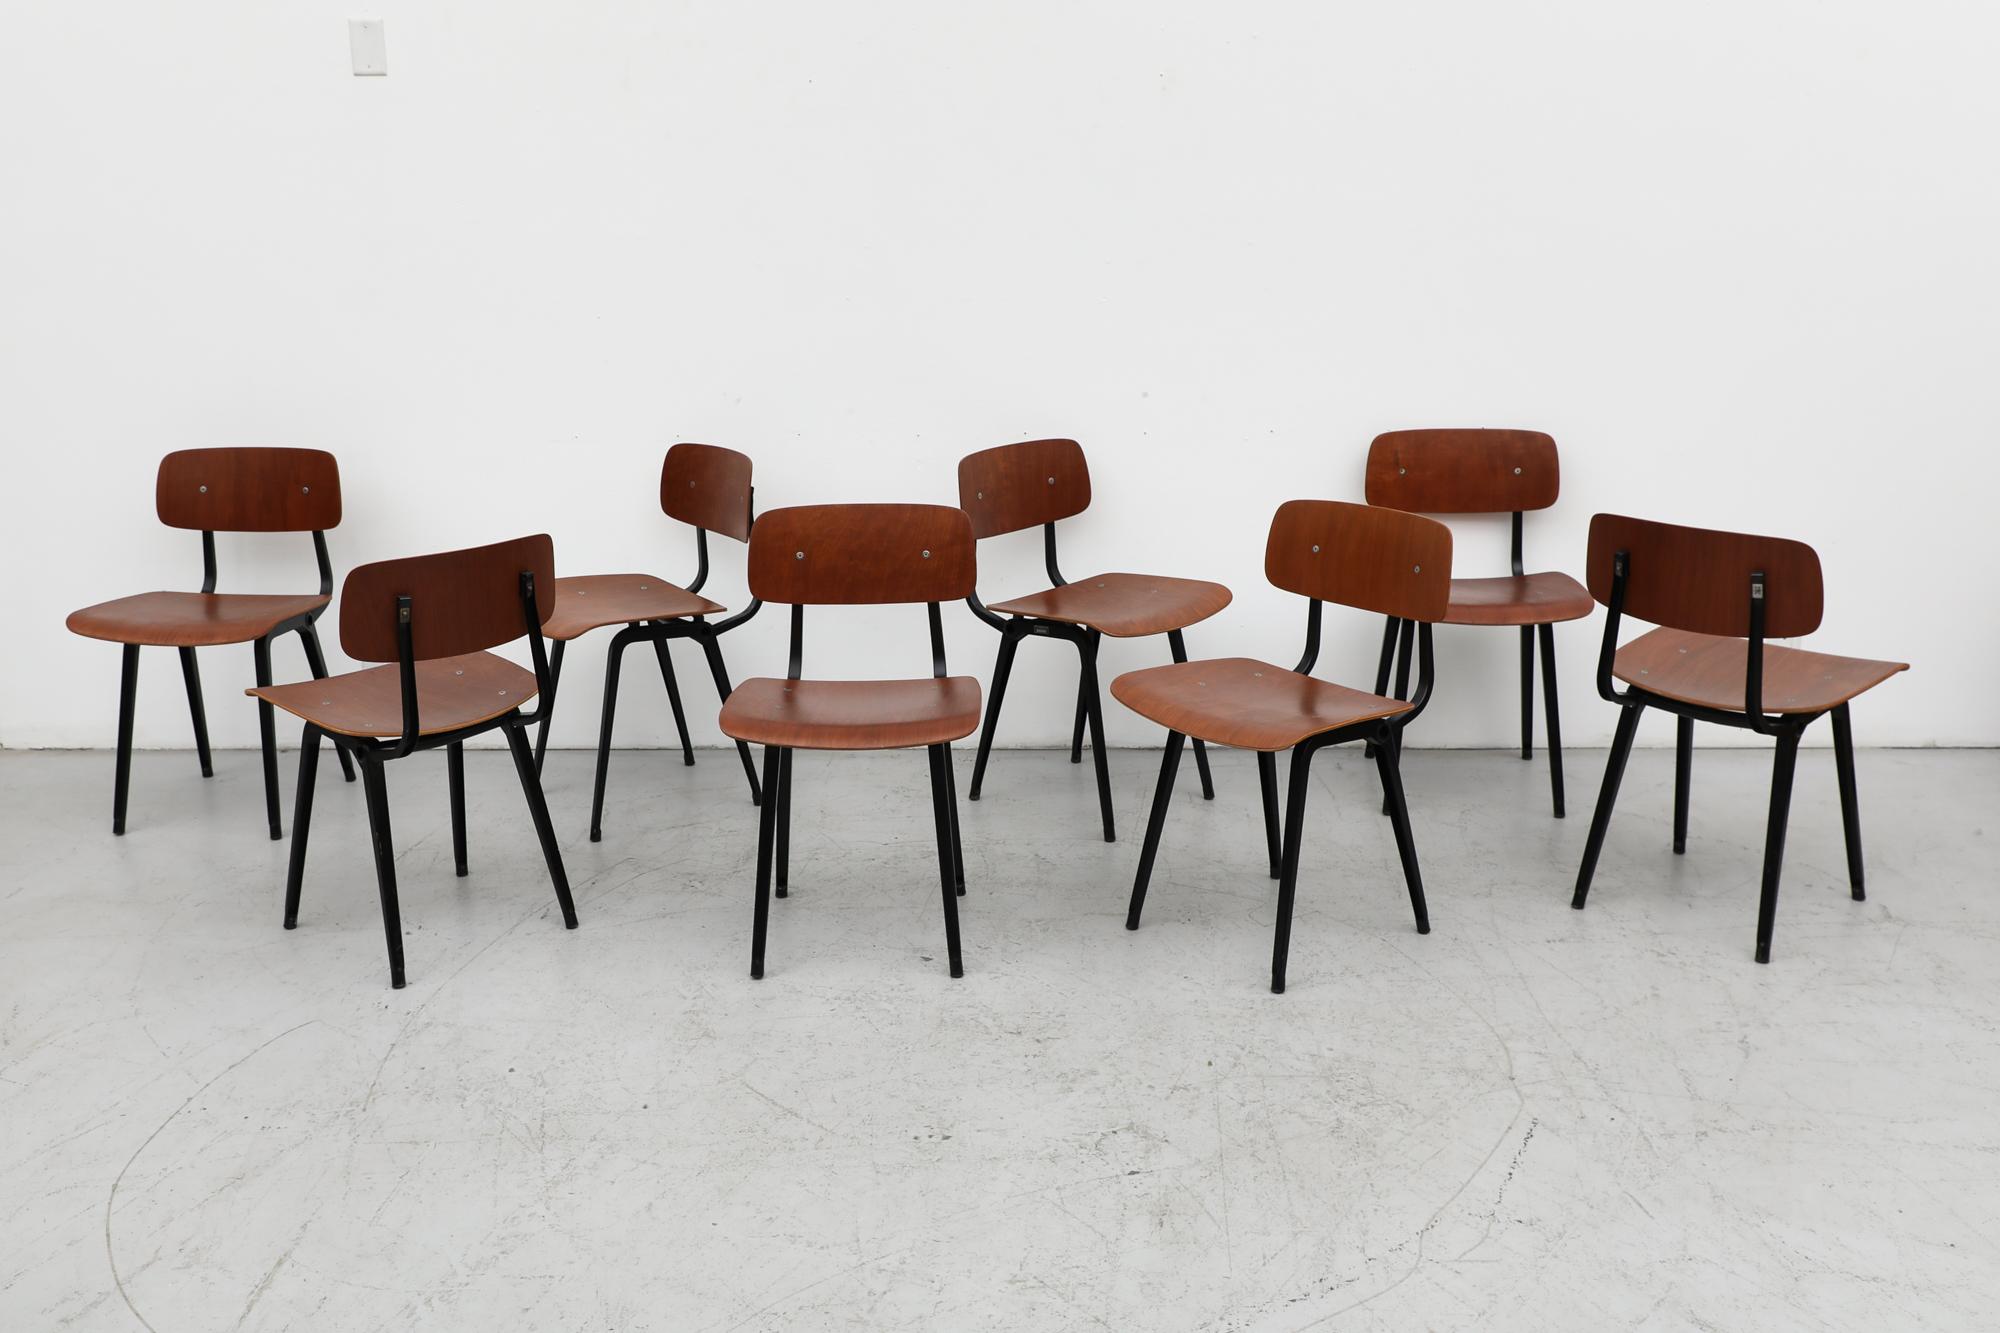 Rare set of 8 wood and metal Mid-Century Friso Kramer 'Revolt' chairs. This set has black enameled metal frames, teak stained plywood seats and back rests. The Revolt chair was designed in 1953 by Friso Kramer for Ahrend de Cirkel with a sleek style